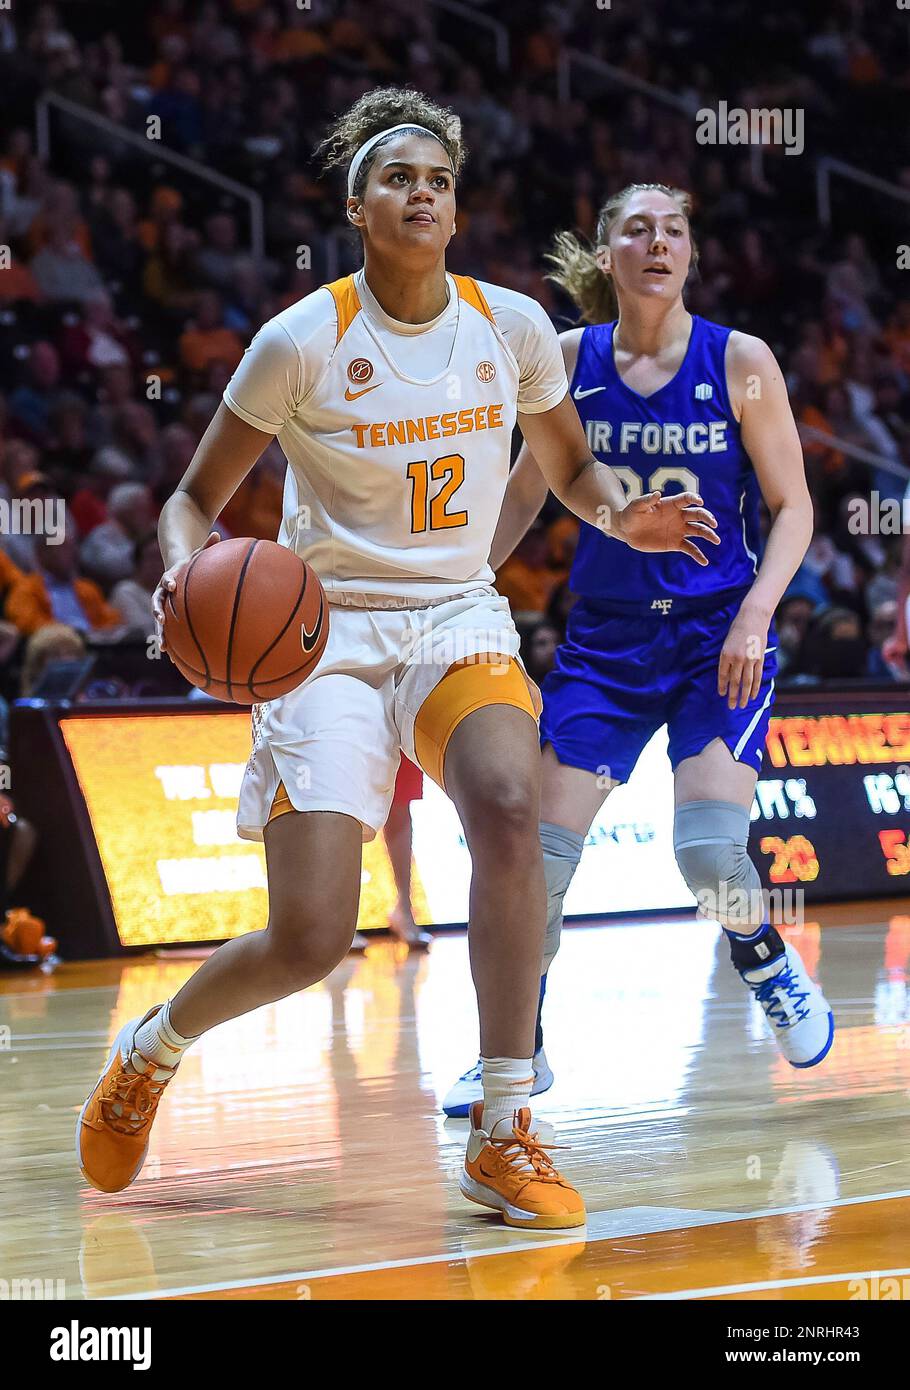 KNOXVILLE, TN - DECEMBER 01: Tennessee Lady Vols guard Rae Burrell (12)  drives to the basket during a college basketball game between the Tennessee  Lady Vols and Air Force Falcons on December